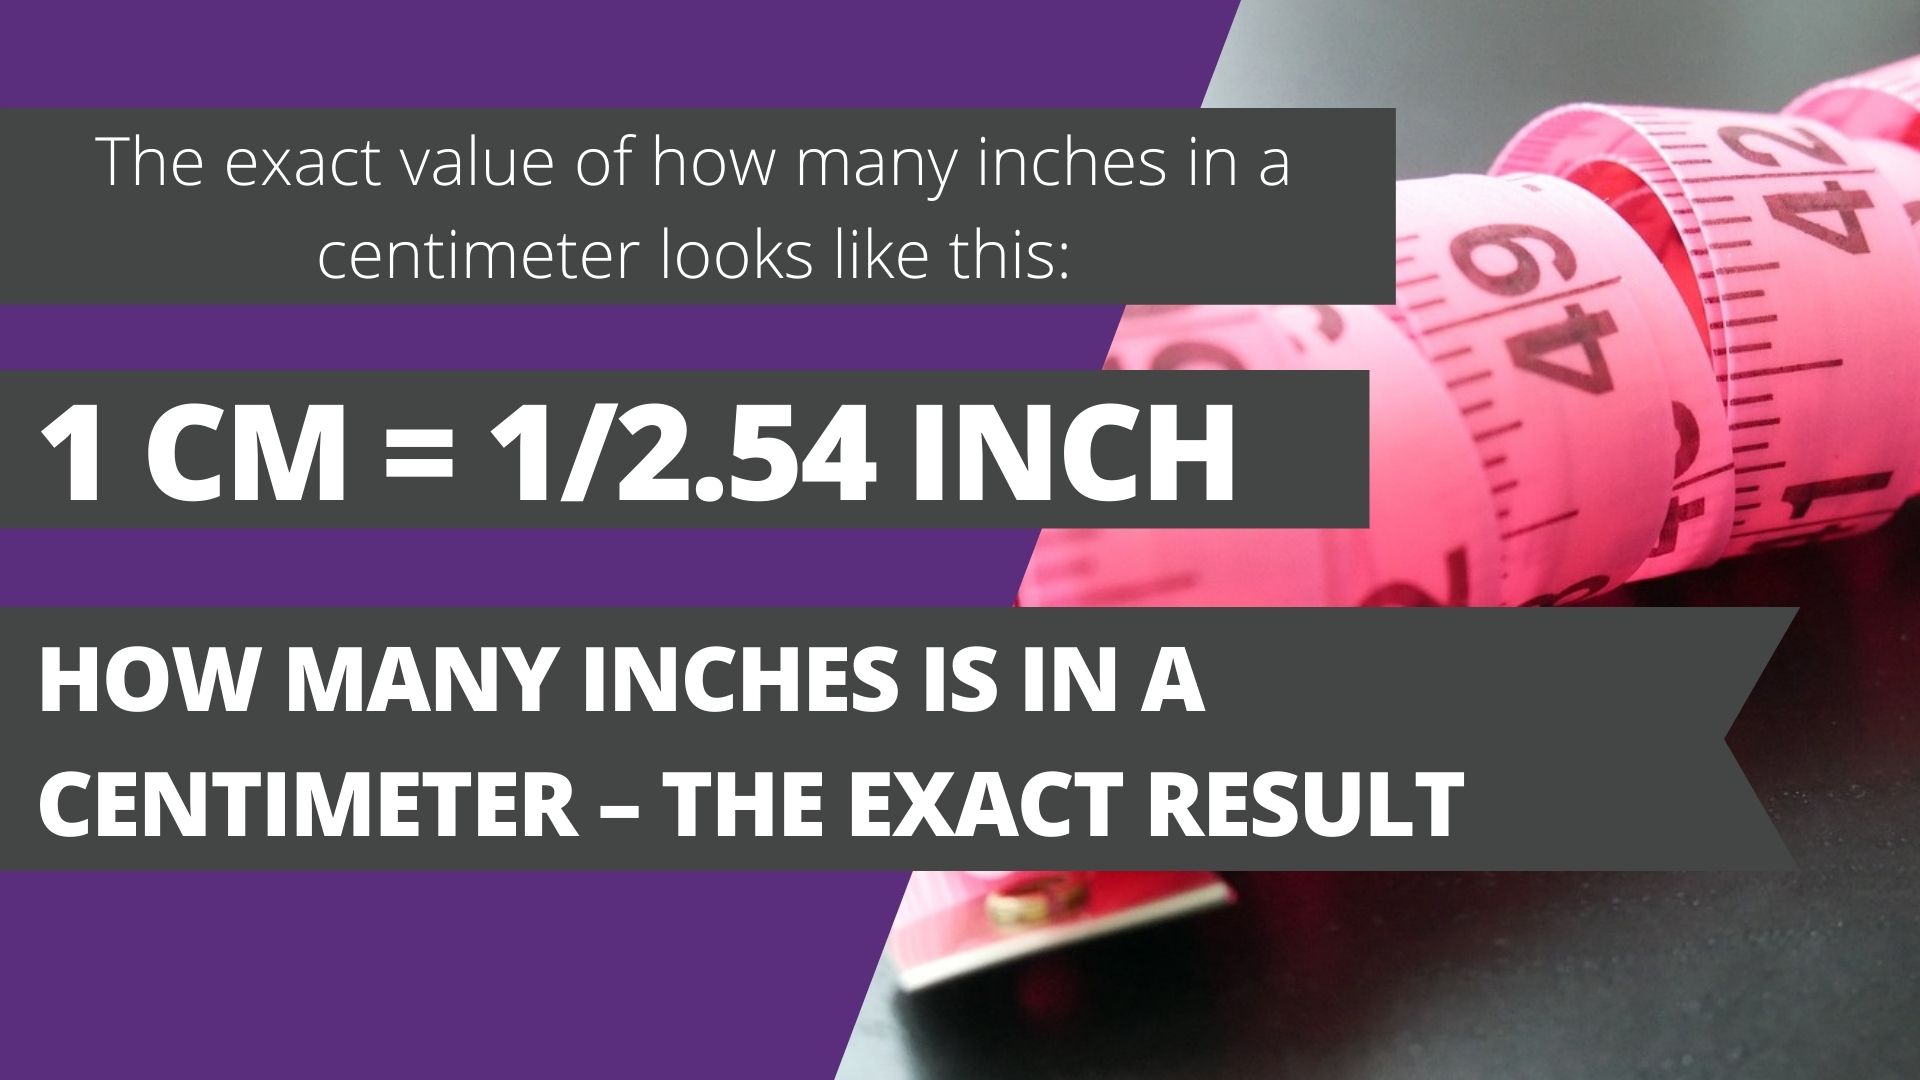 How many inches is in a centimeter – the exact result